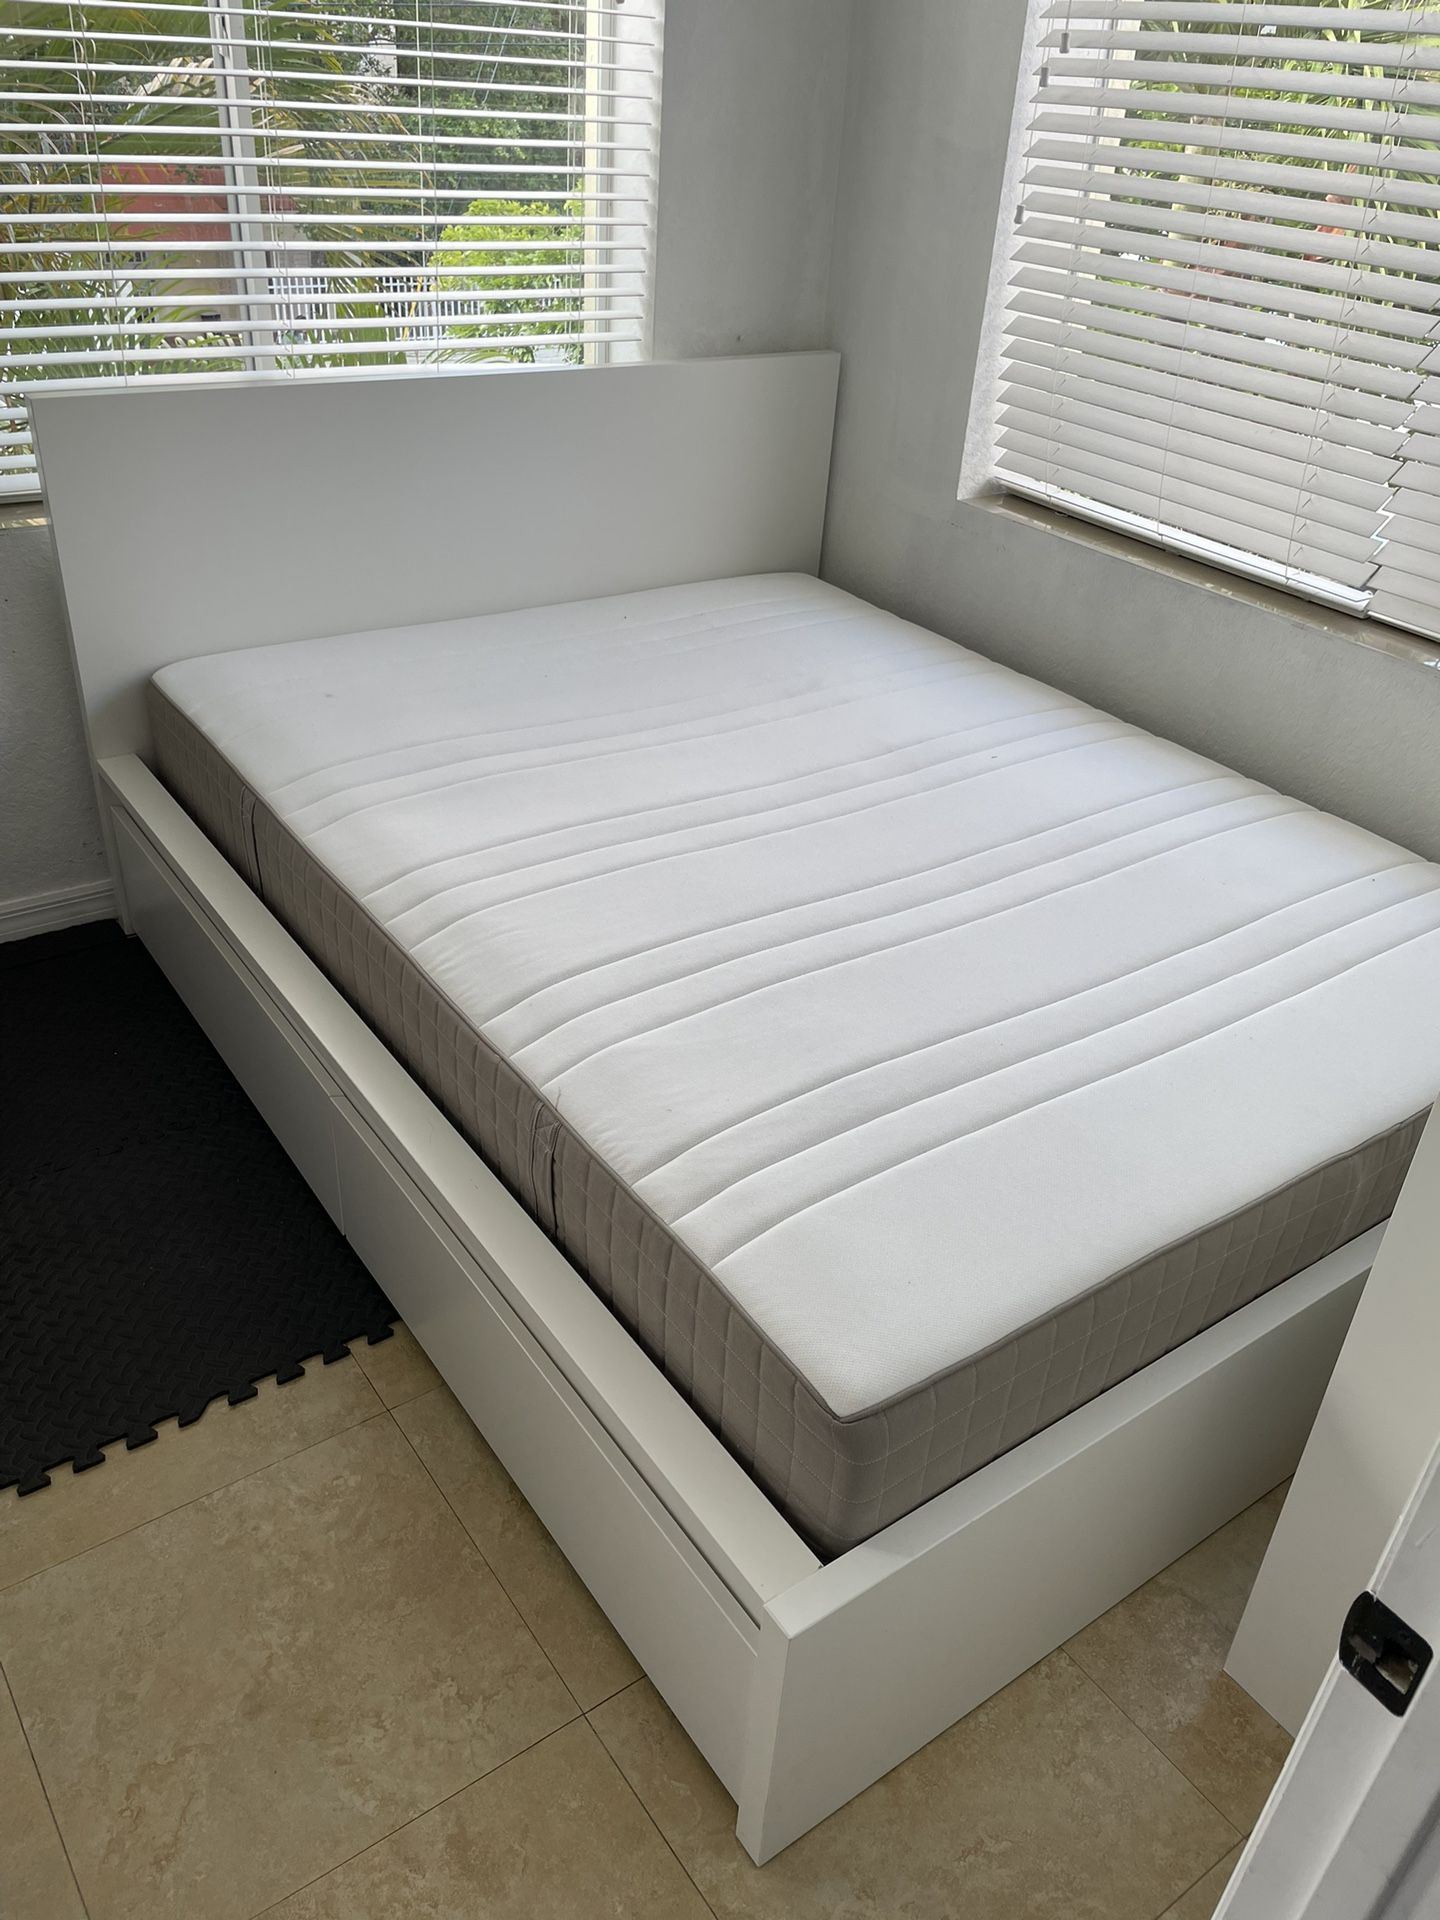 Queen Size with Mattress, High bed frame/2 storage boxes